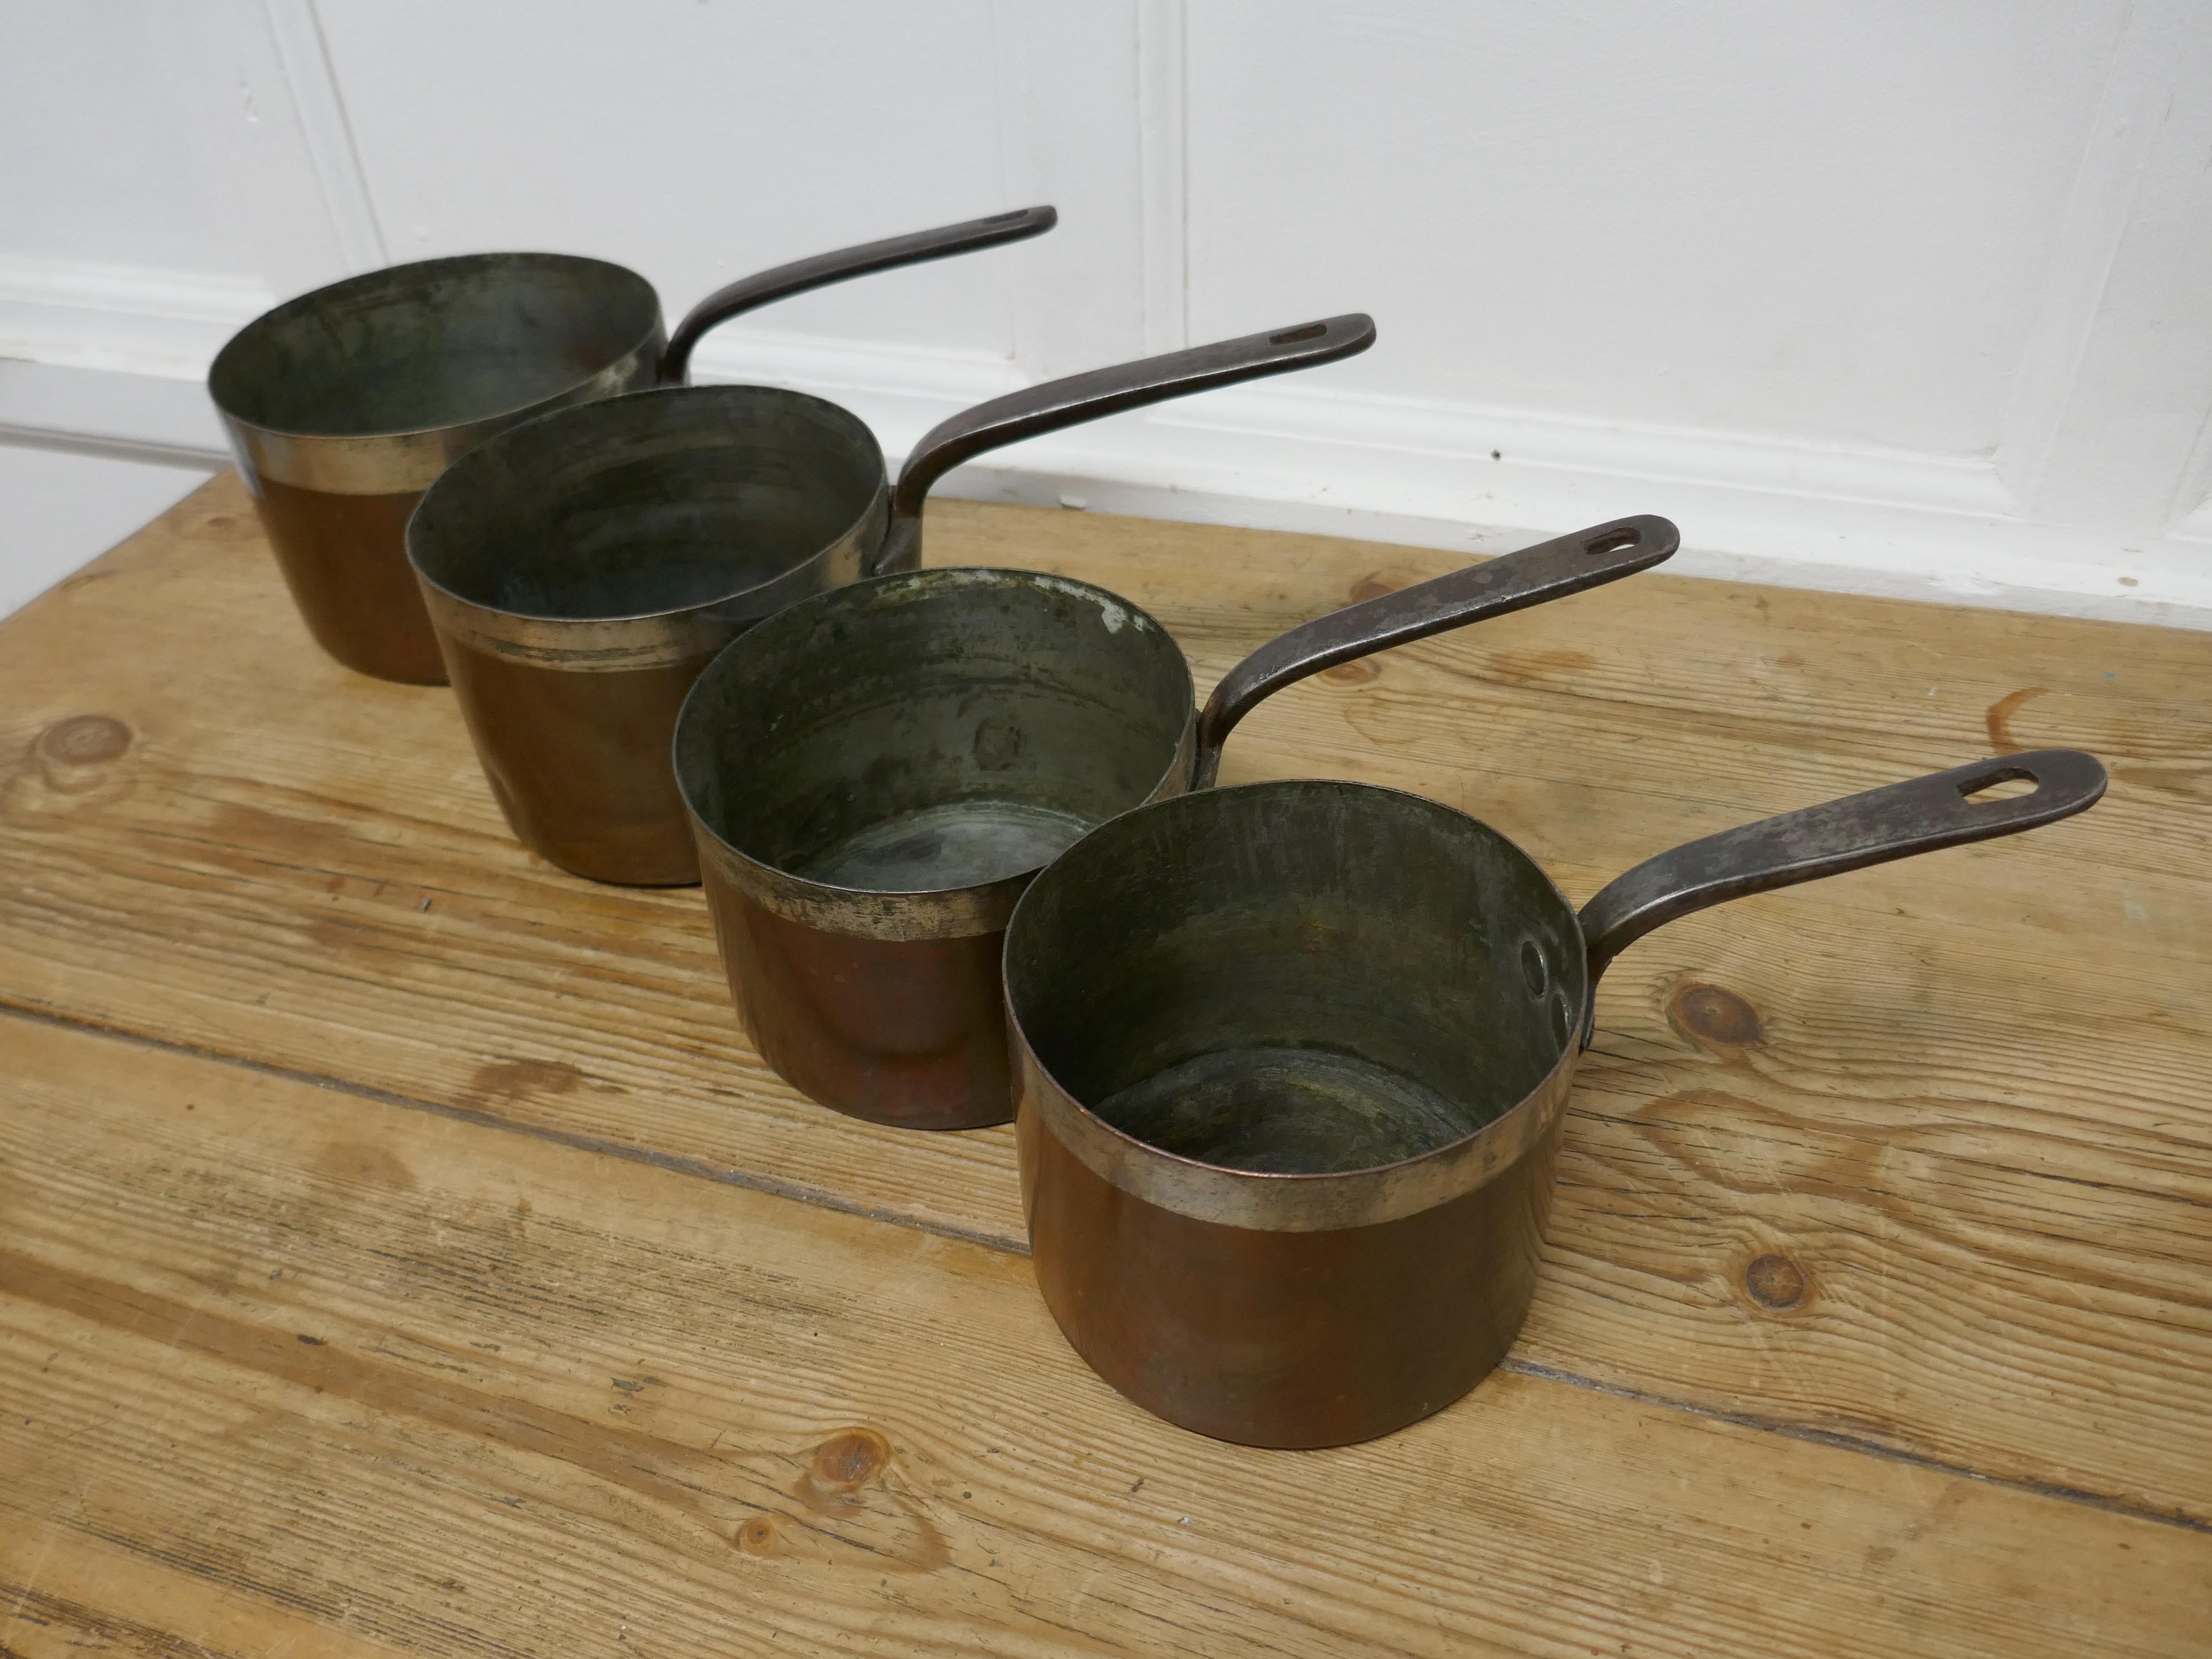 Set of 4 19th century Scottish tinned copper pots by James Grayson


Set of 4, 19th century Scottish copper pots by James Grayson of Edinburgh, the pots are tinned inside an around the top rim, they have cast Iron handles one has the letter ’T’